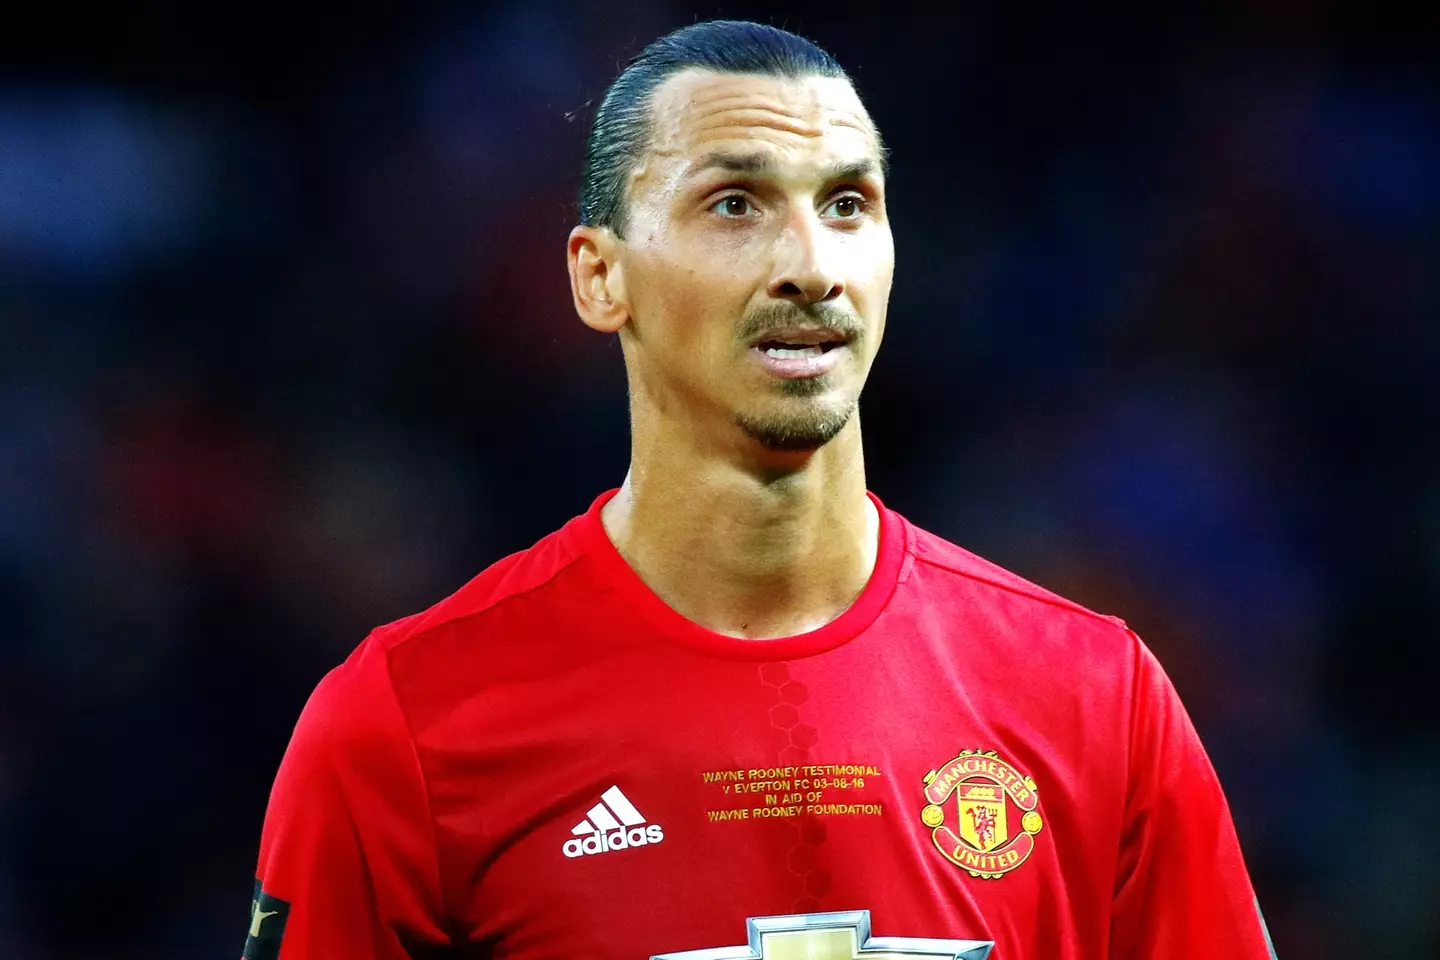 Zlatan Ibrahimovic playing for Manchester United in 2016. (Image: Alamy)